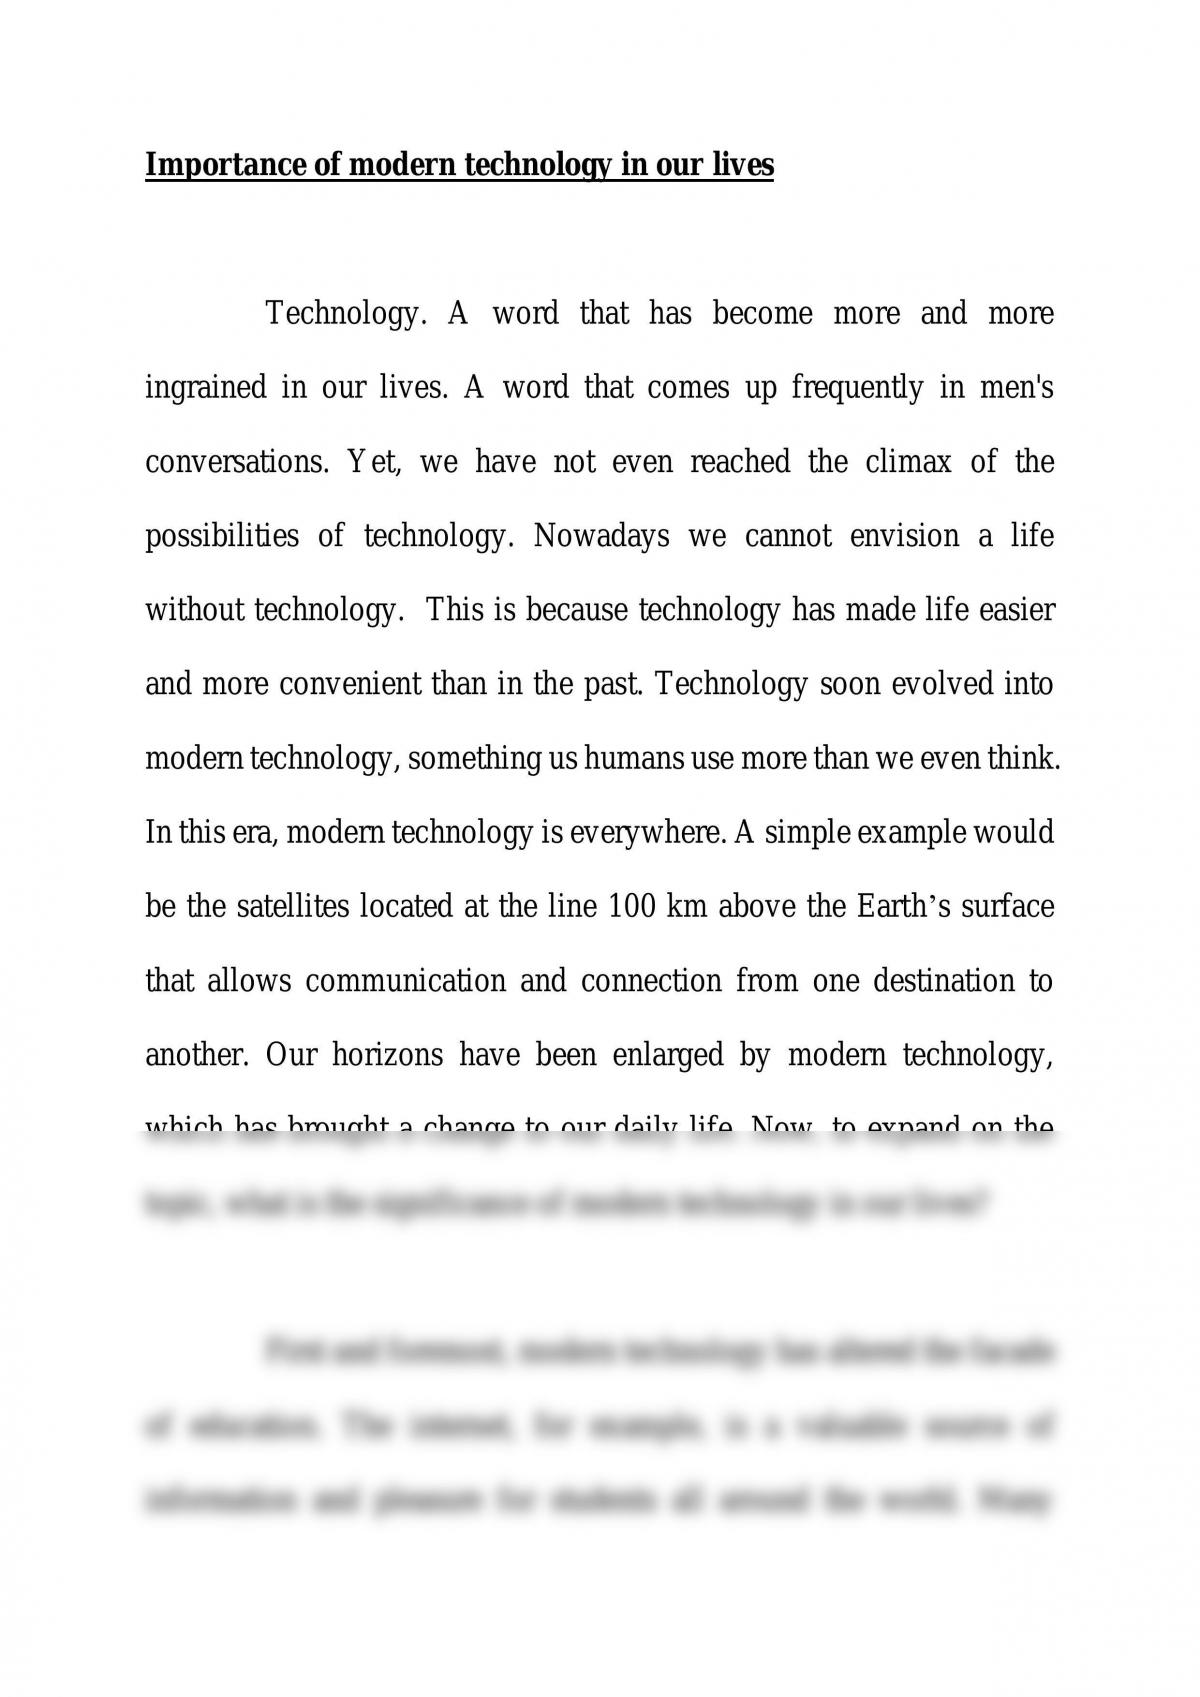 essay on technology and modern life